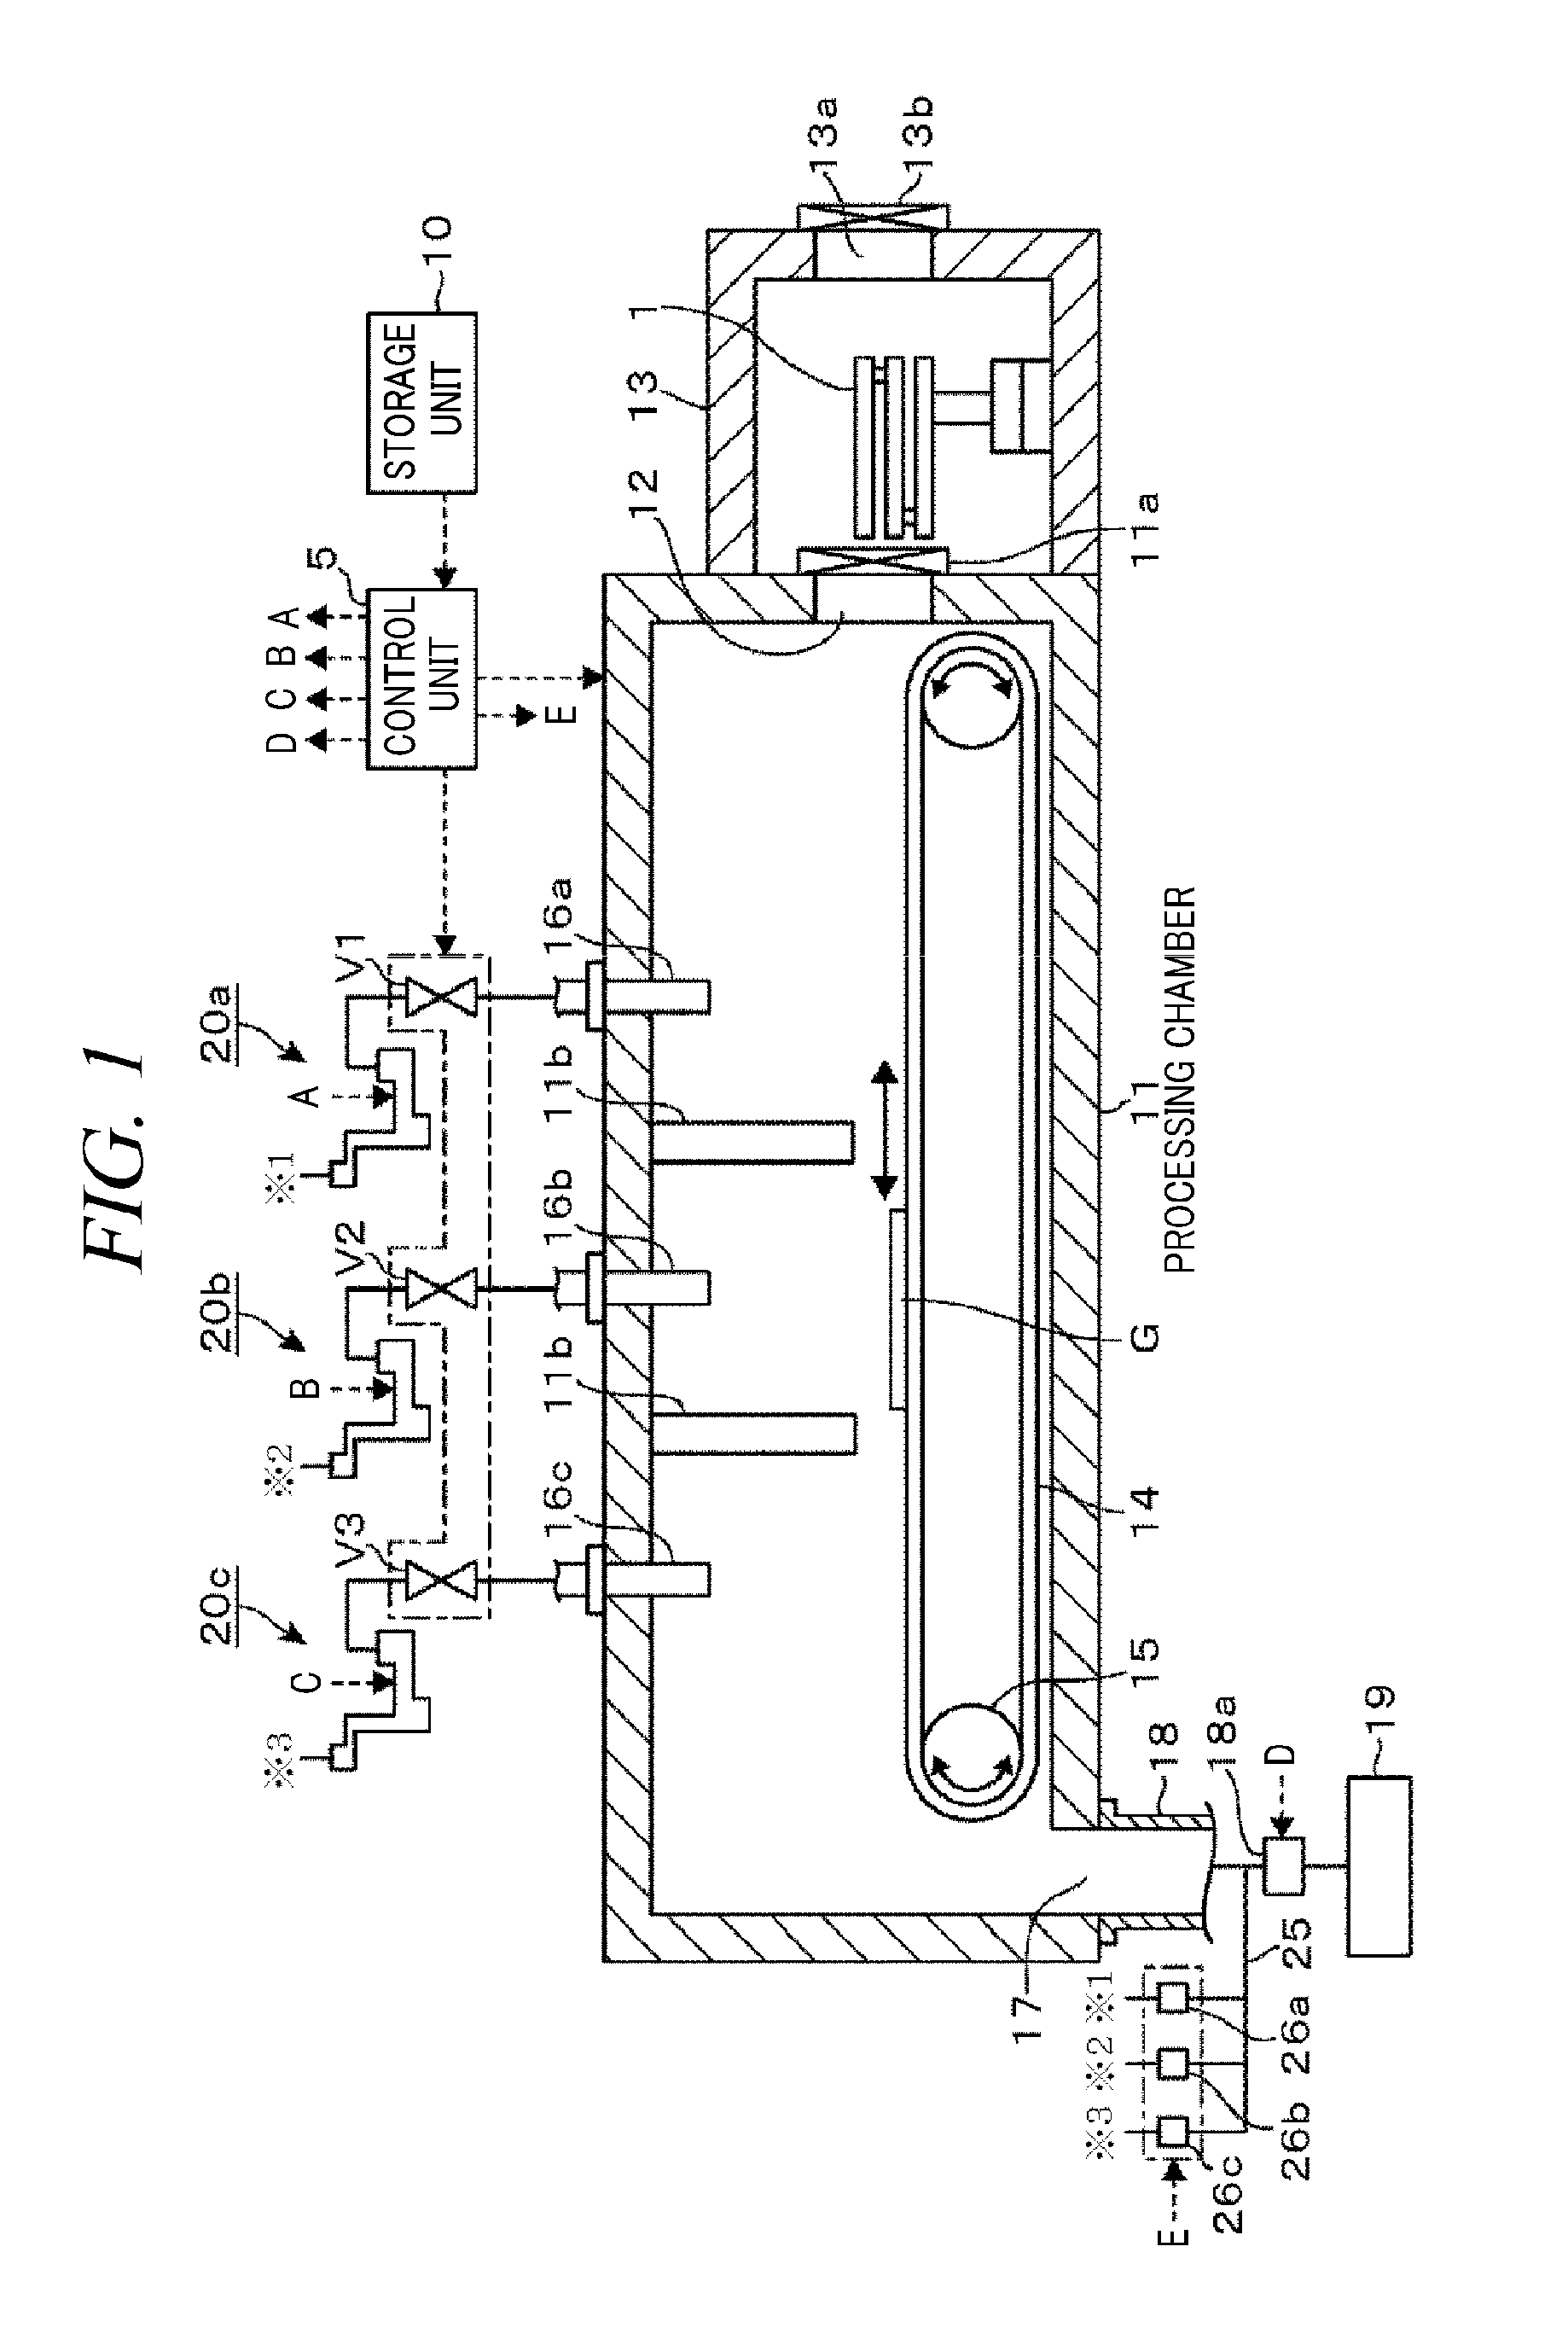 Source gas generating device and film forming apparatus